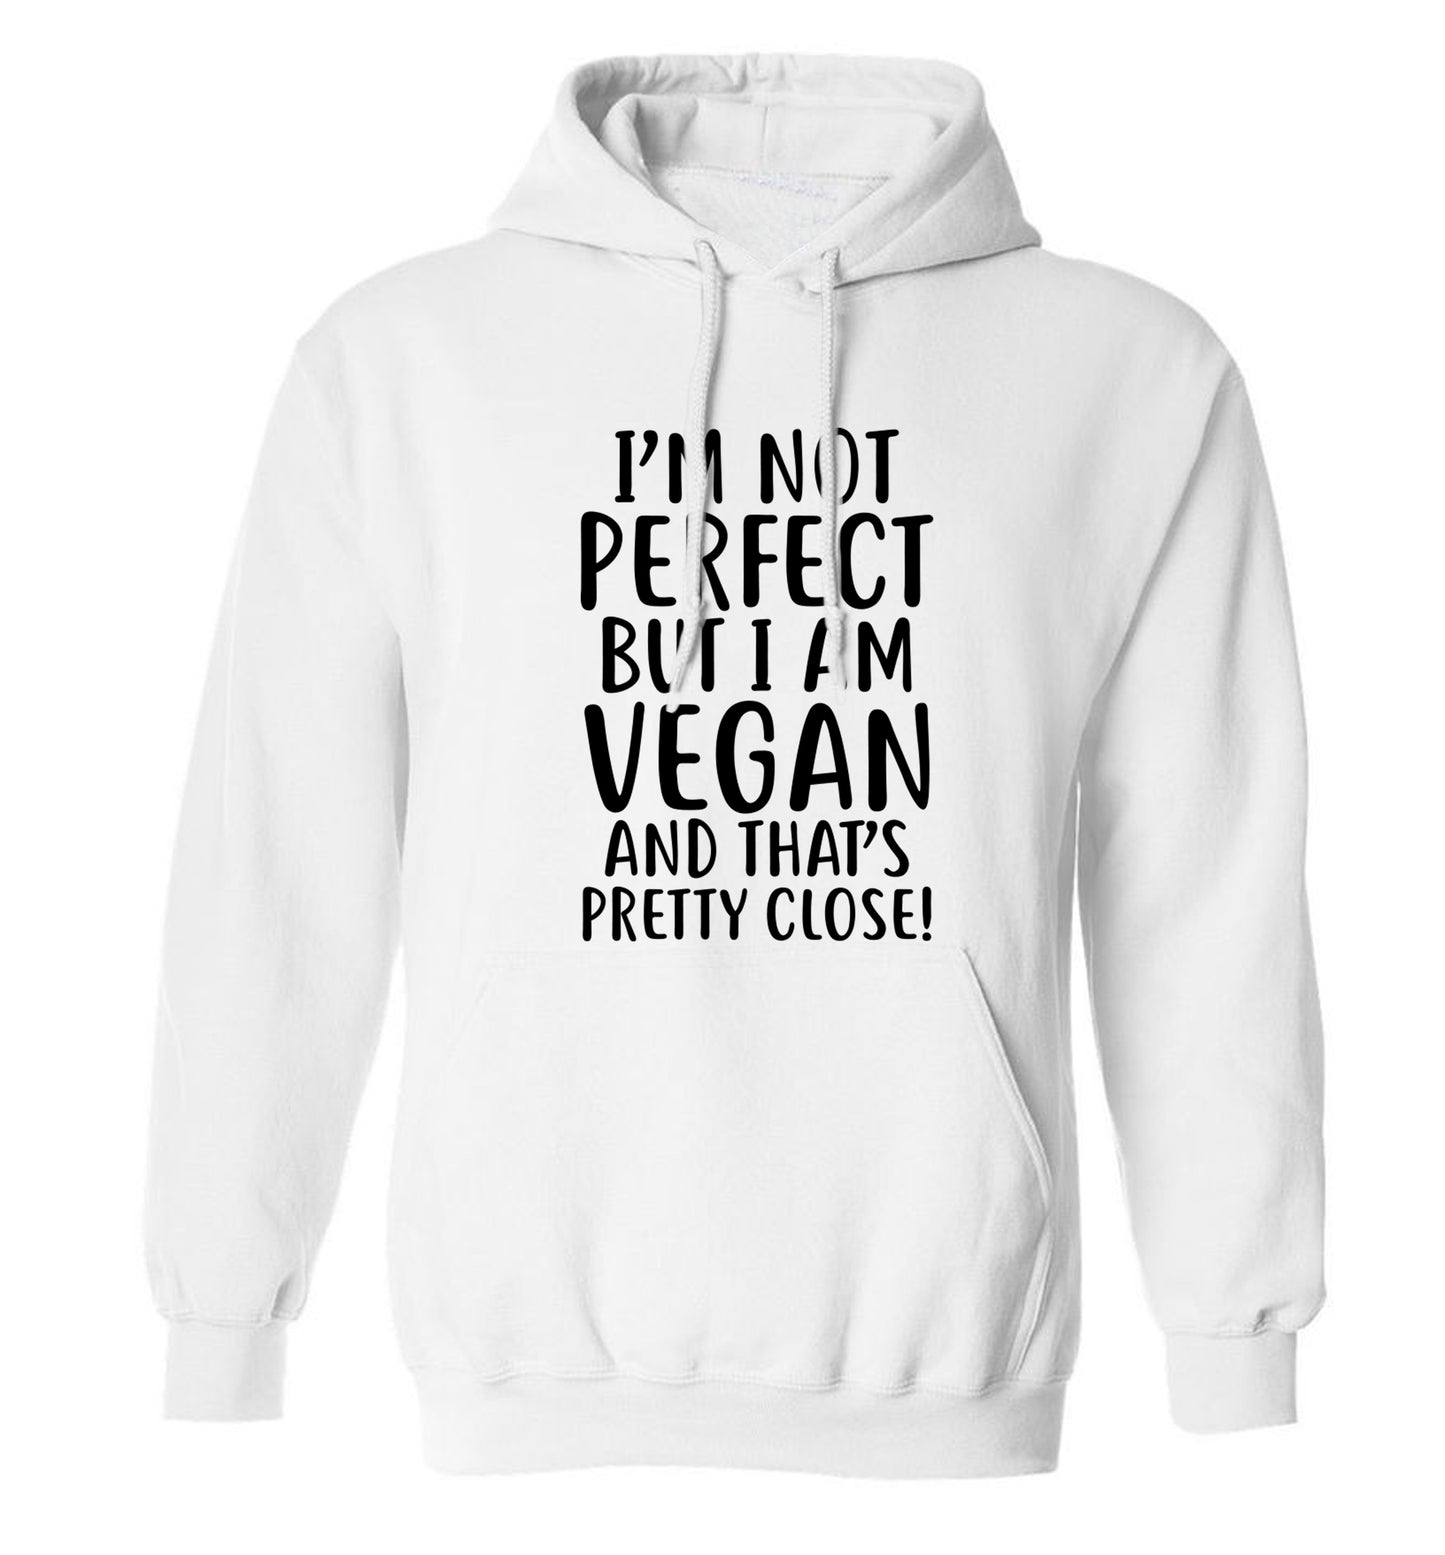 Might not be perfect but I am vegan adults unisex white hoodie 2XL